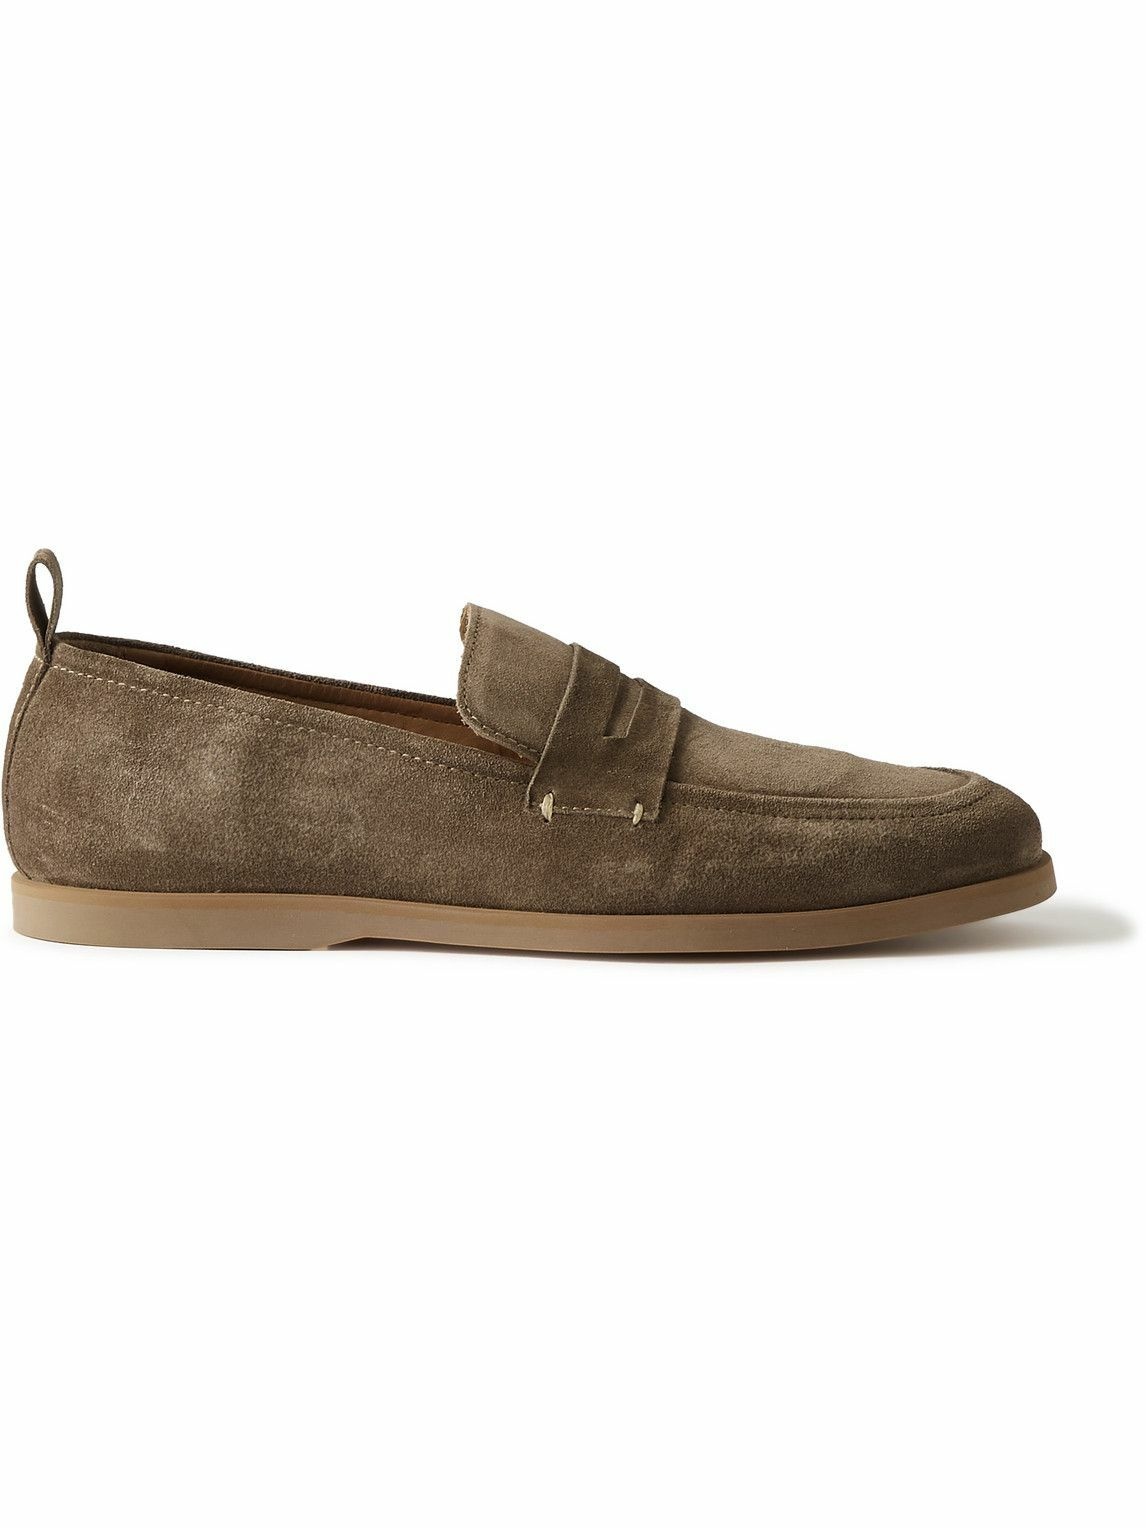 Photo: Mr P. - Leo Suede Penny Loafers - Brown